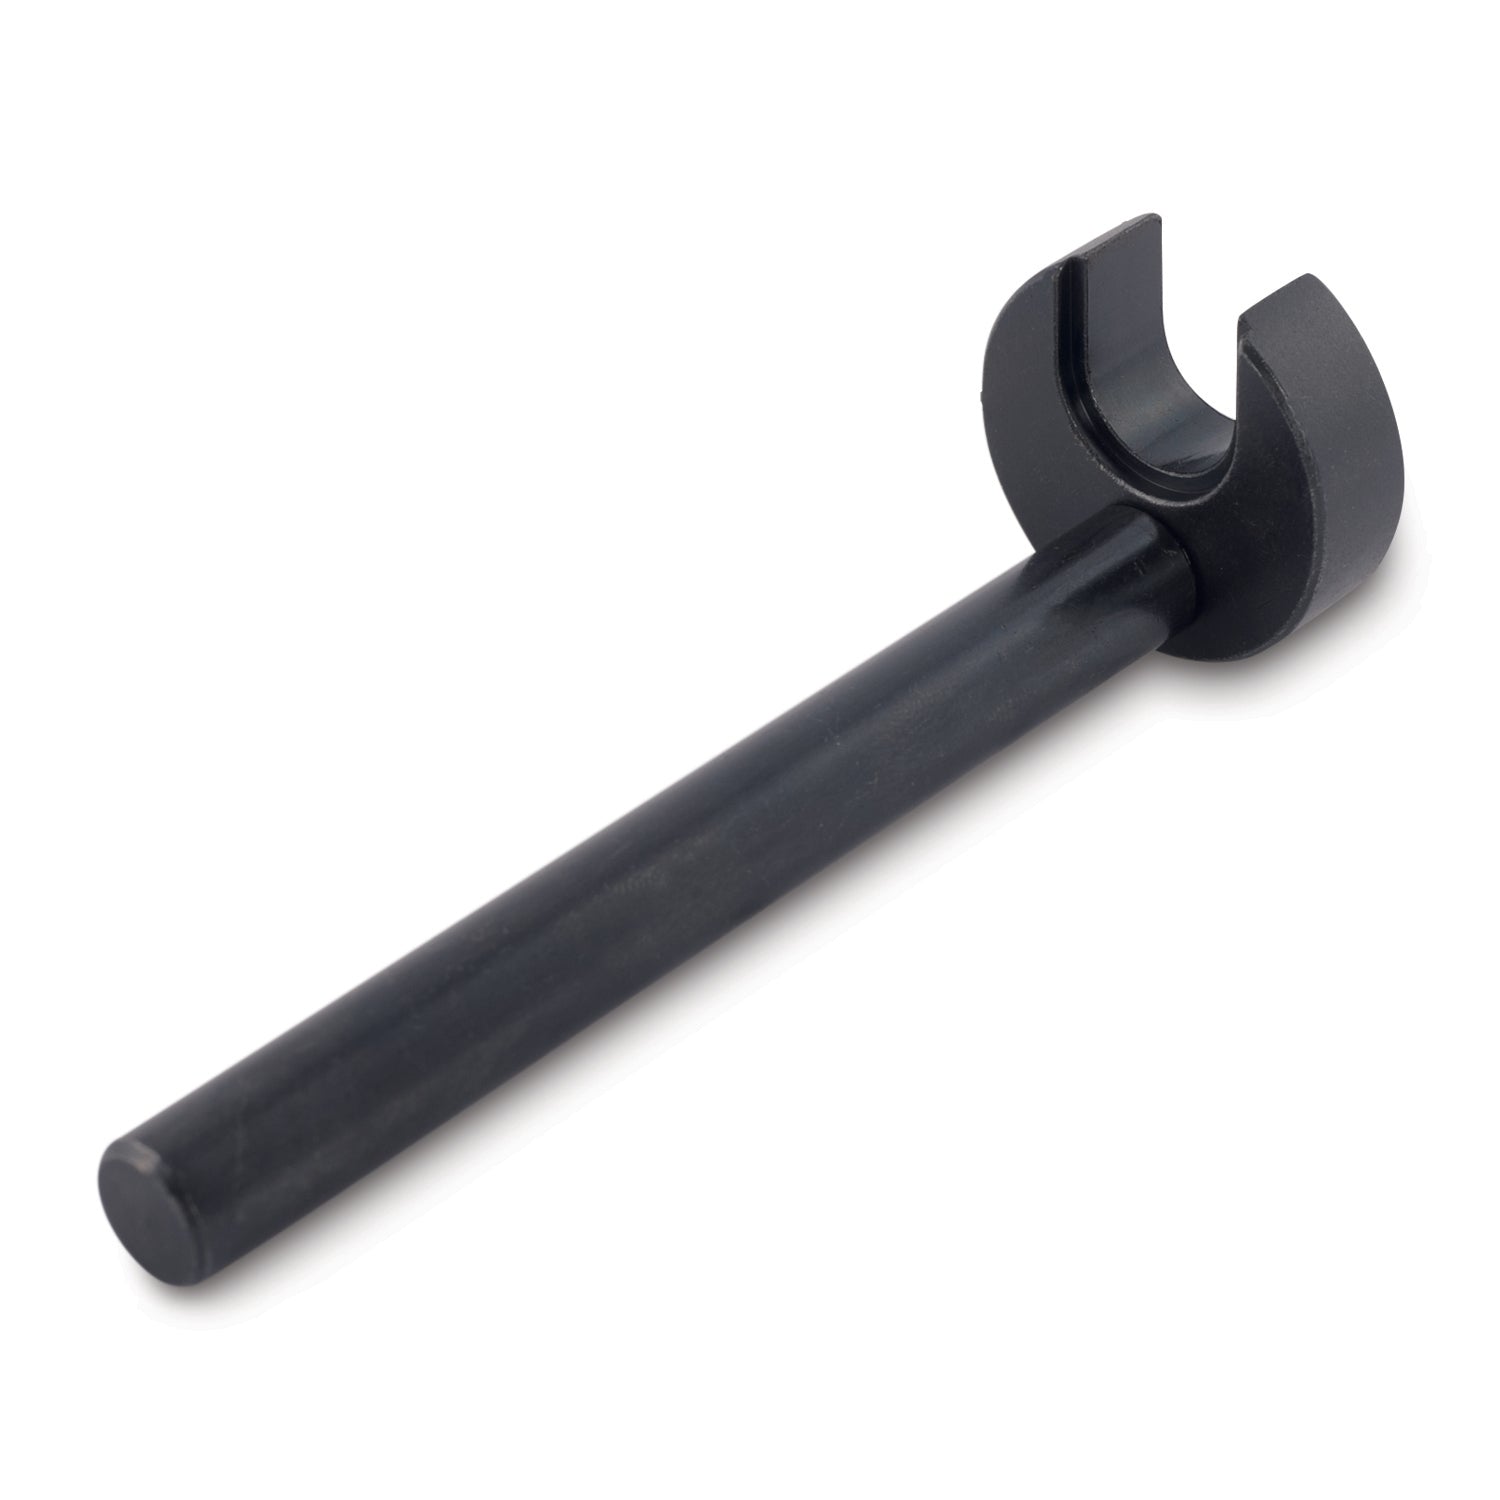 CHEVY S/B OIL PUMP PICK-UP DRIVER TOOL